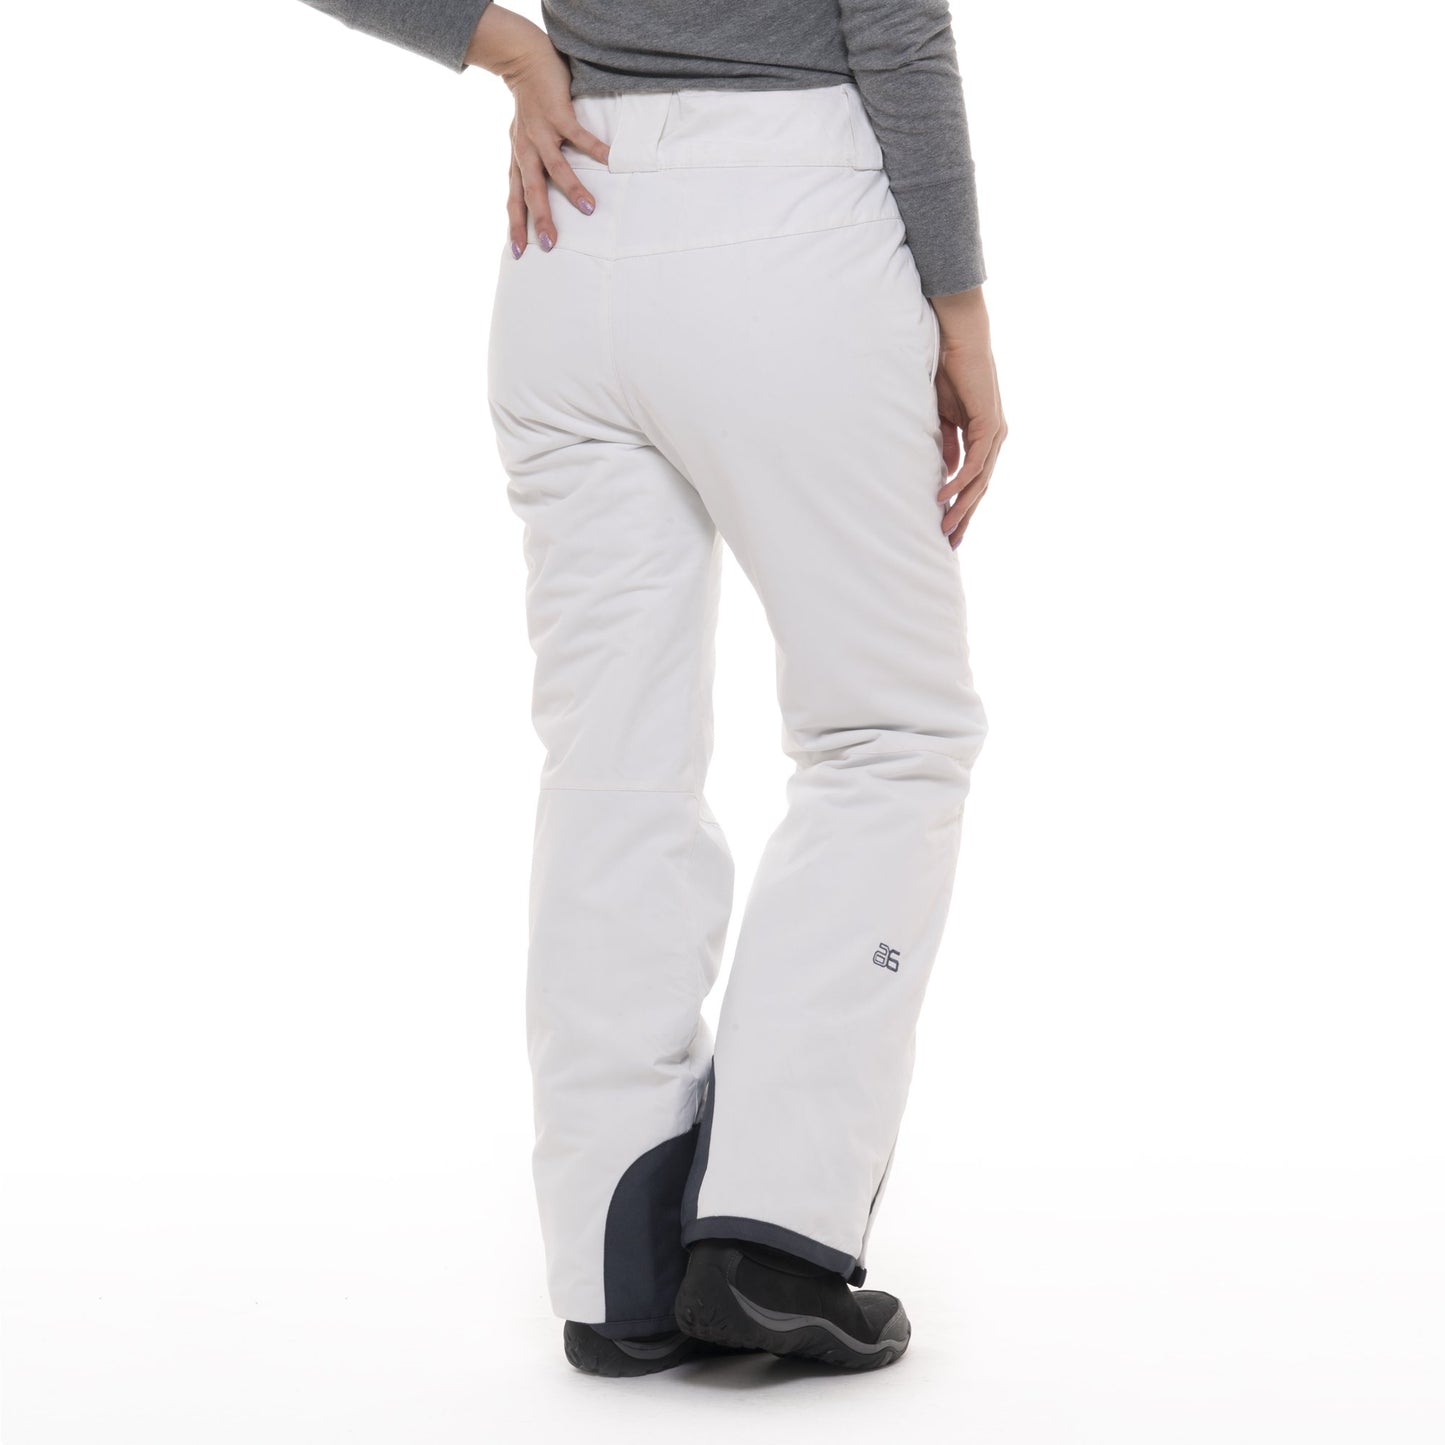 SkiGear by Arctix Womens and Plus Size Insulated Snow Pant